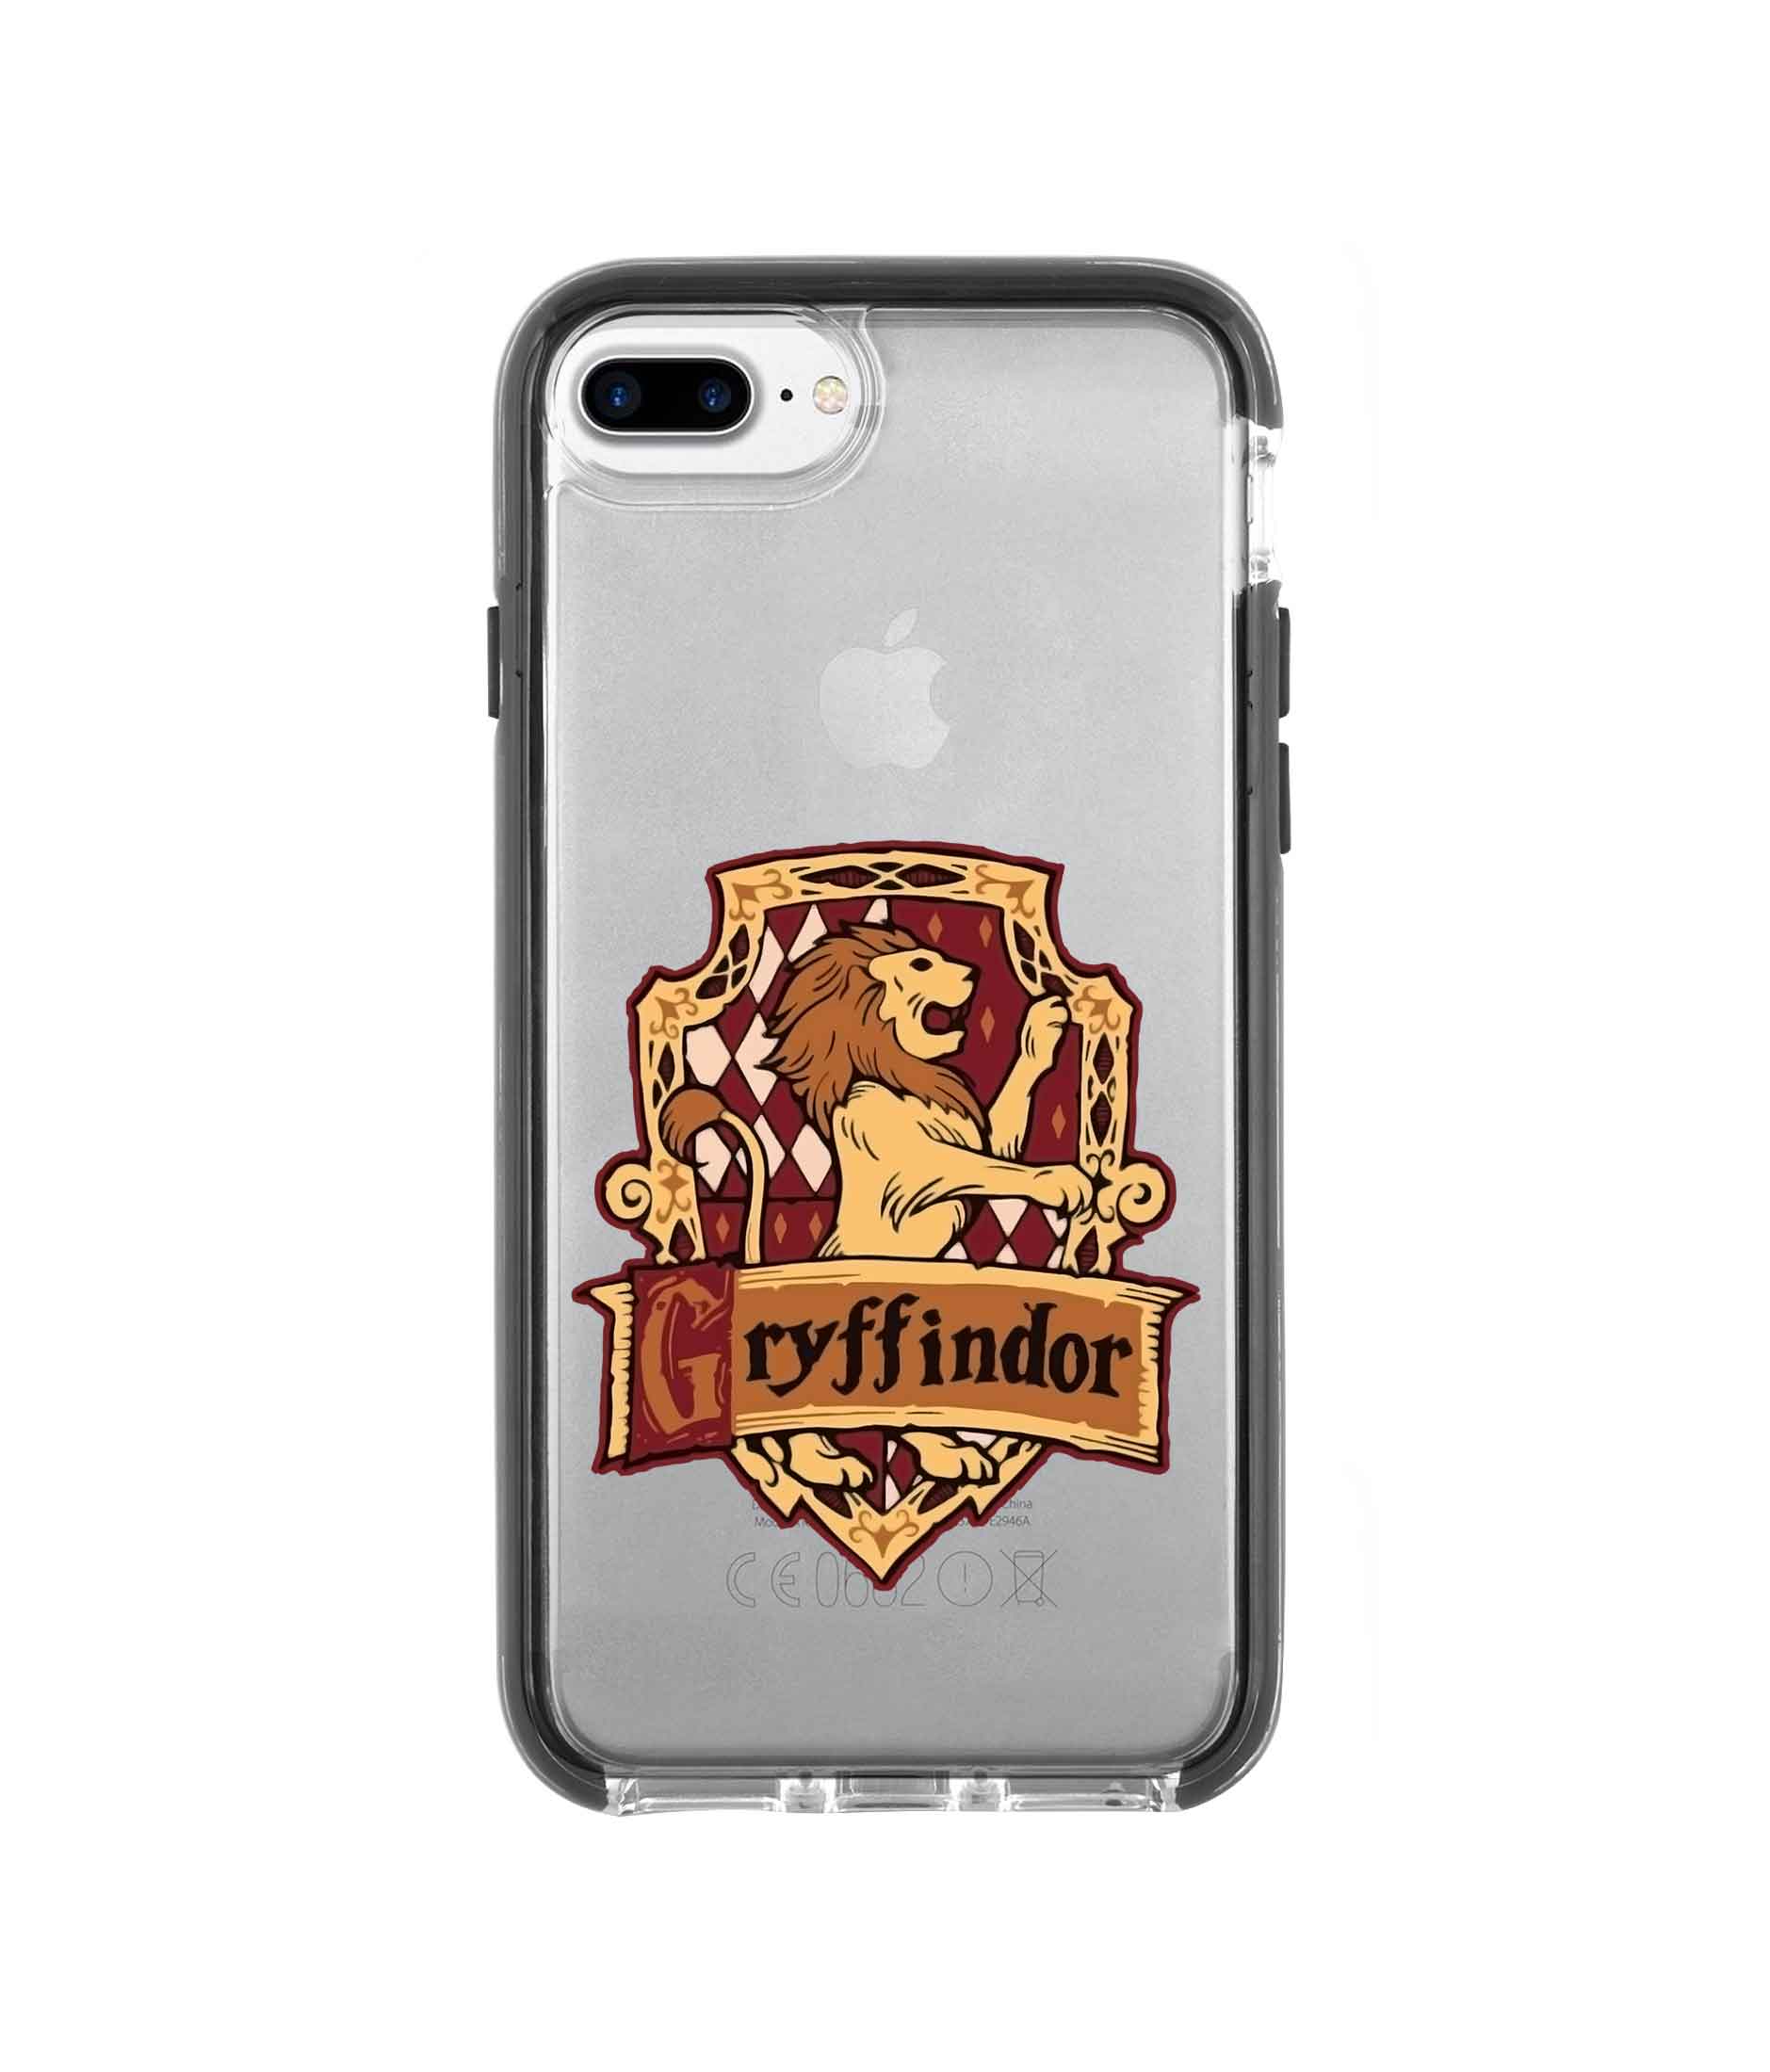 Crest Gryffindor - Extreme Phone Case for iPhone 7 Plus